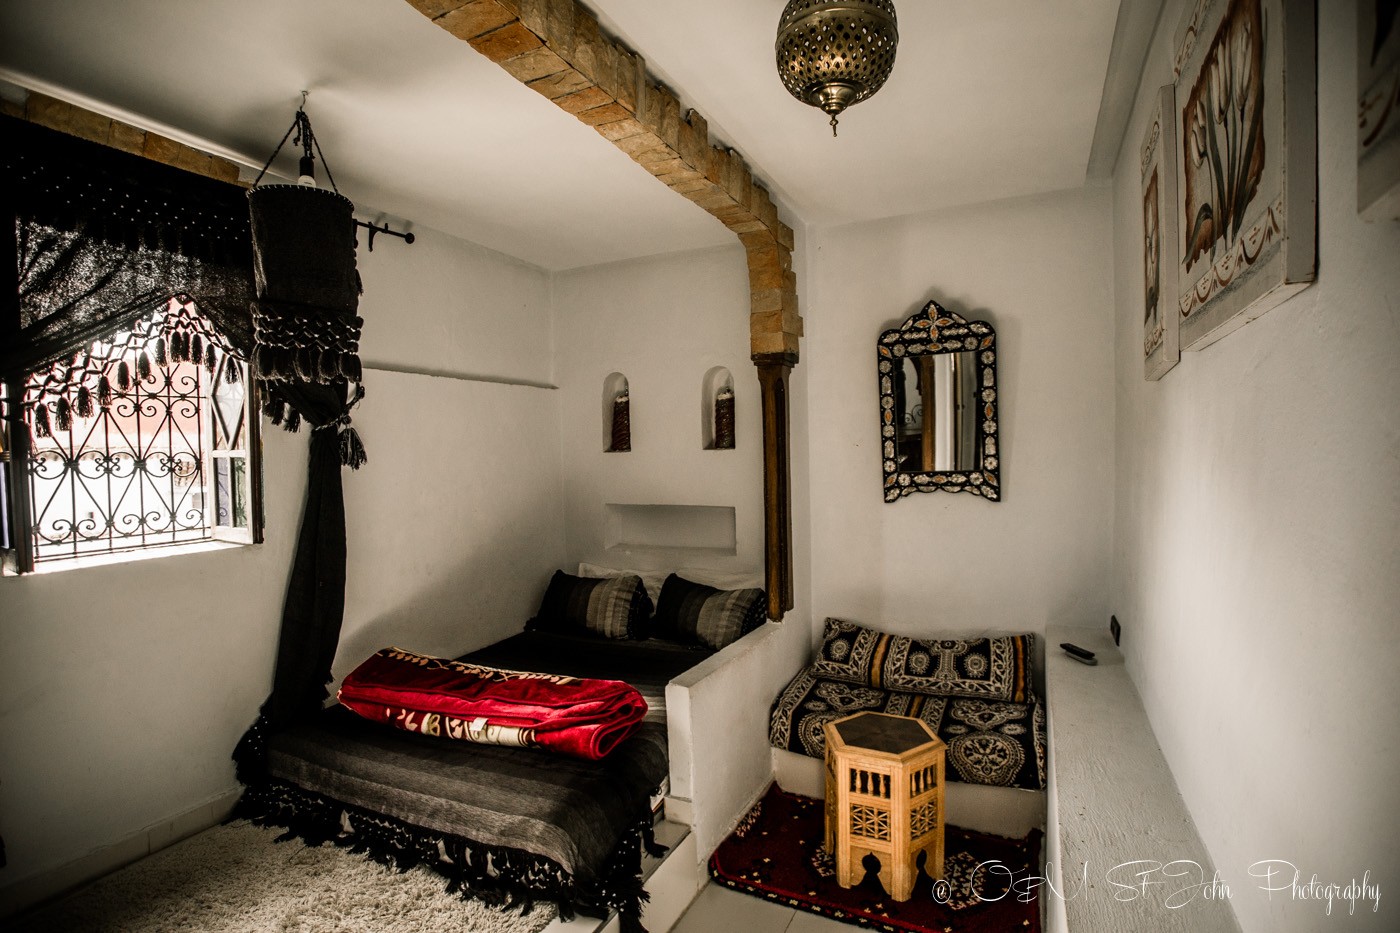 Our fancy suite in Maison Hotel. Chefchaouen, Morocco